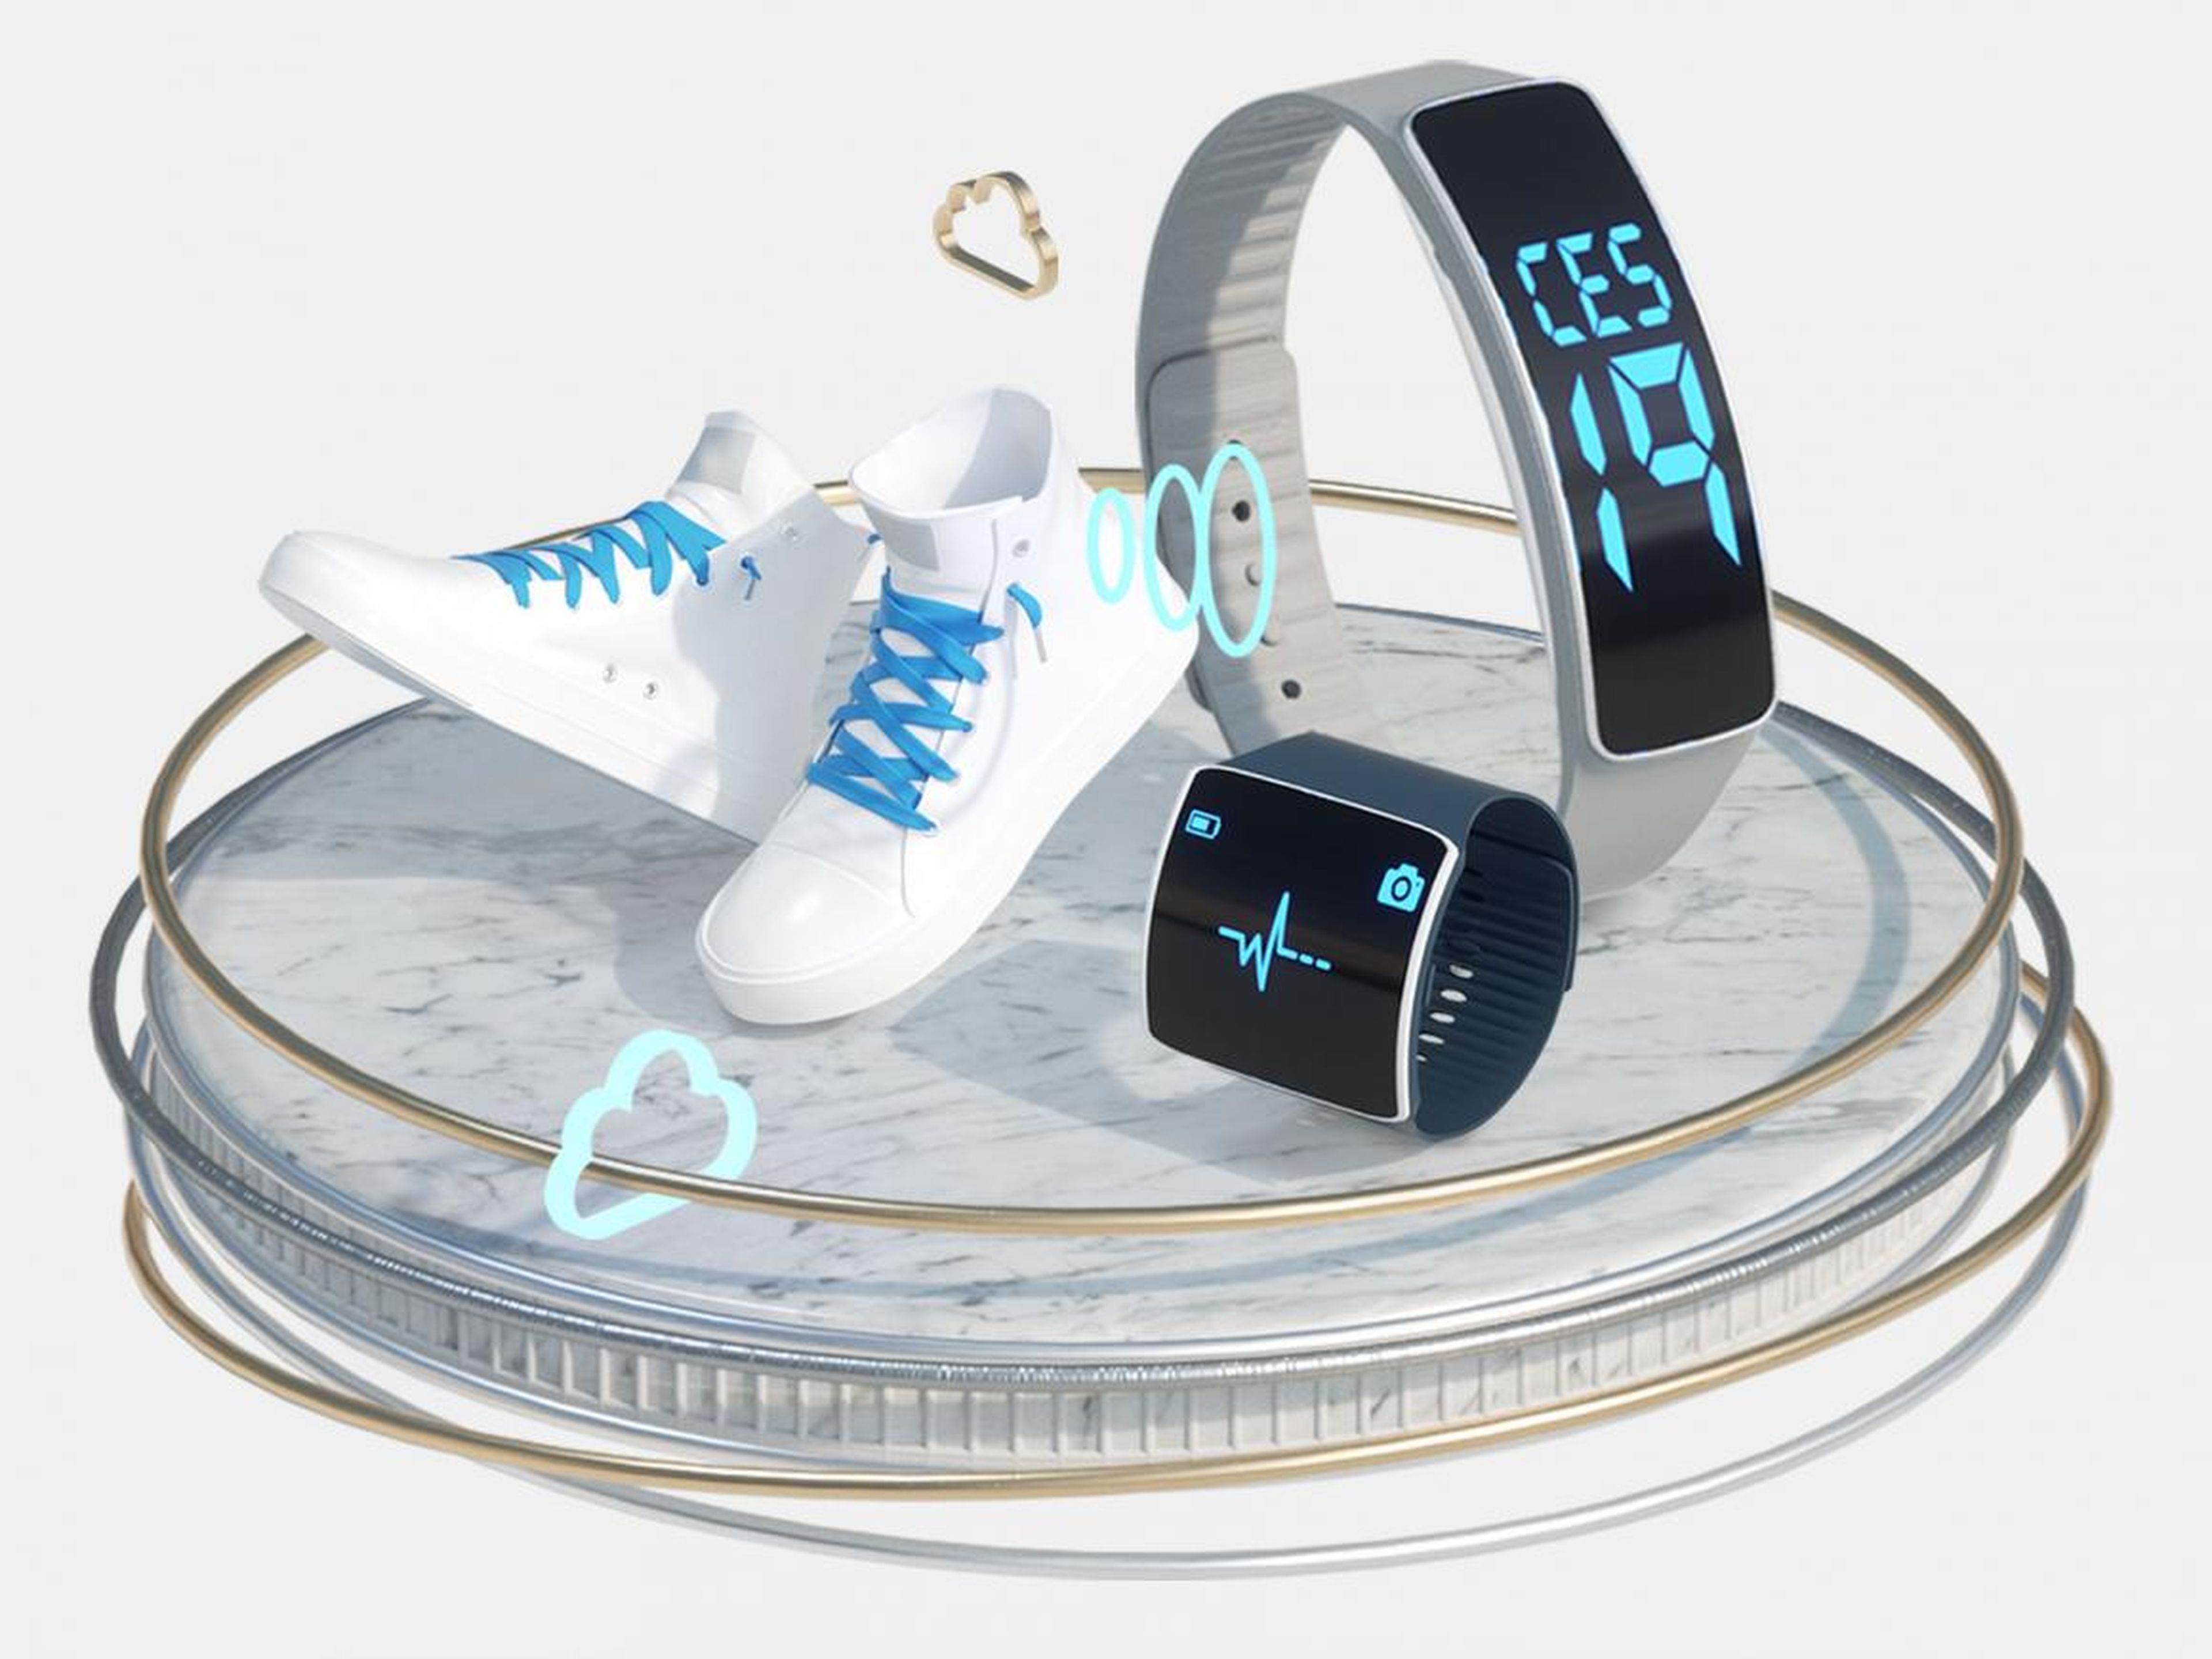 Gadgets to monitor your health are getting smaller and more accurate